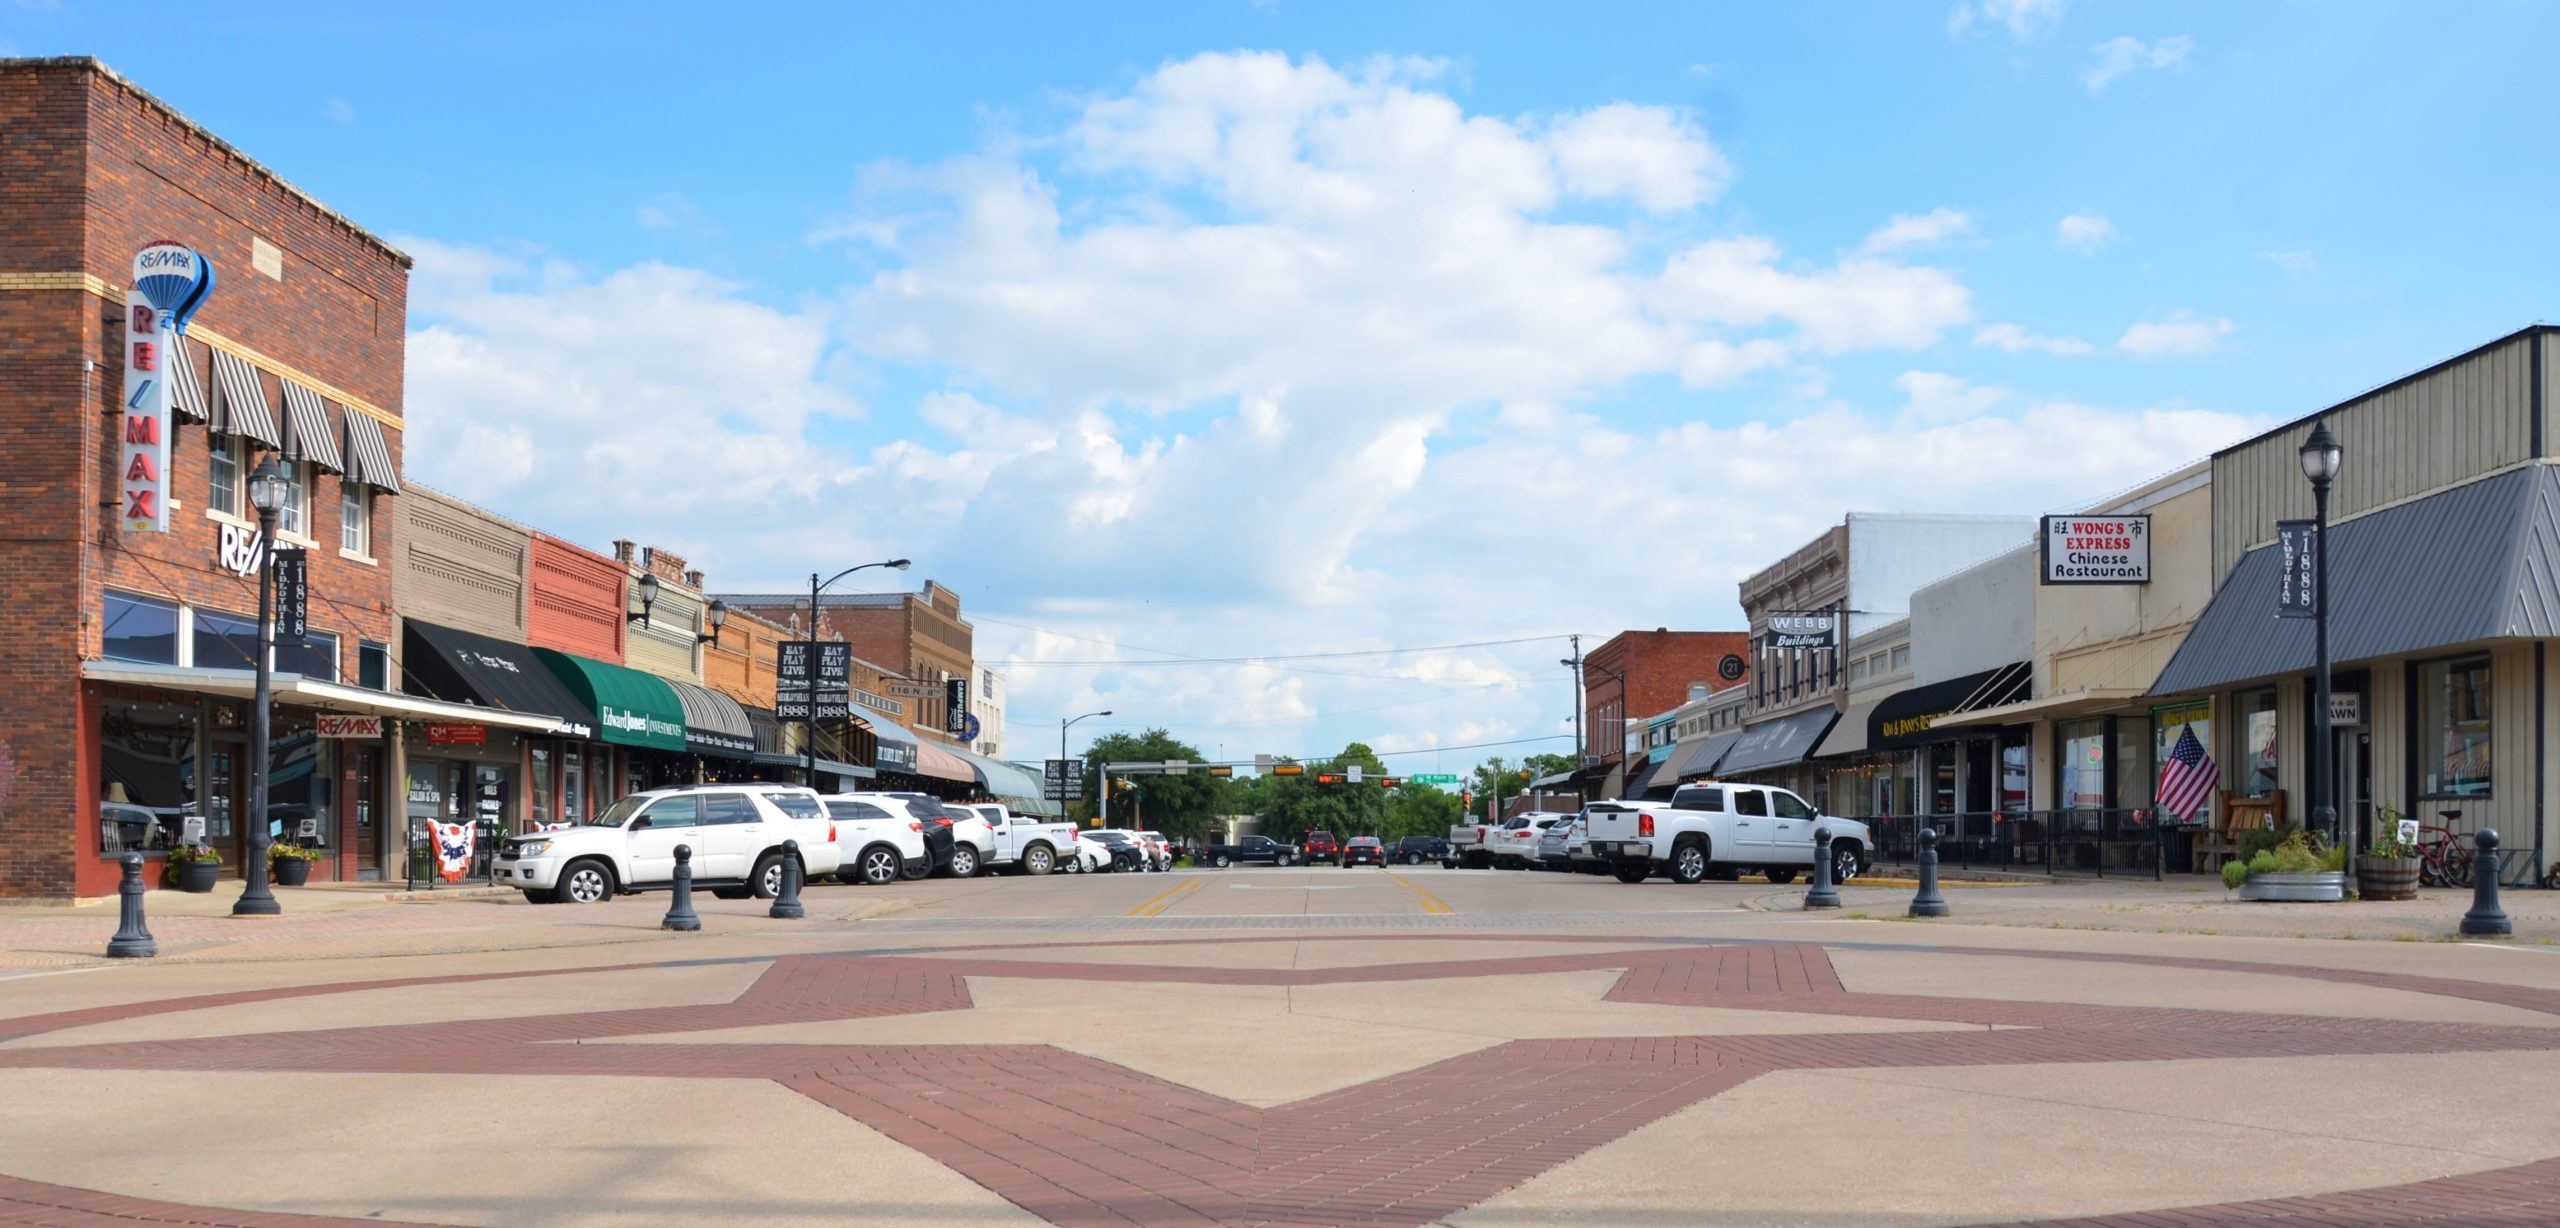 downtown Midlothian, Texas with buildings and parked cars